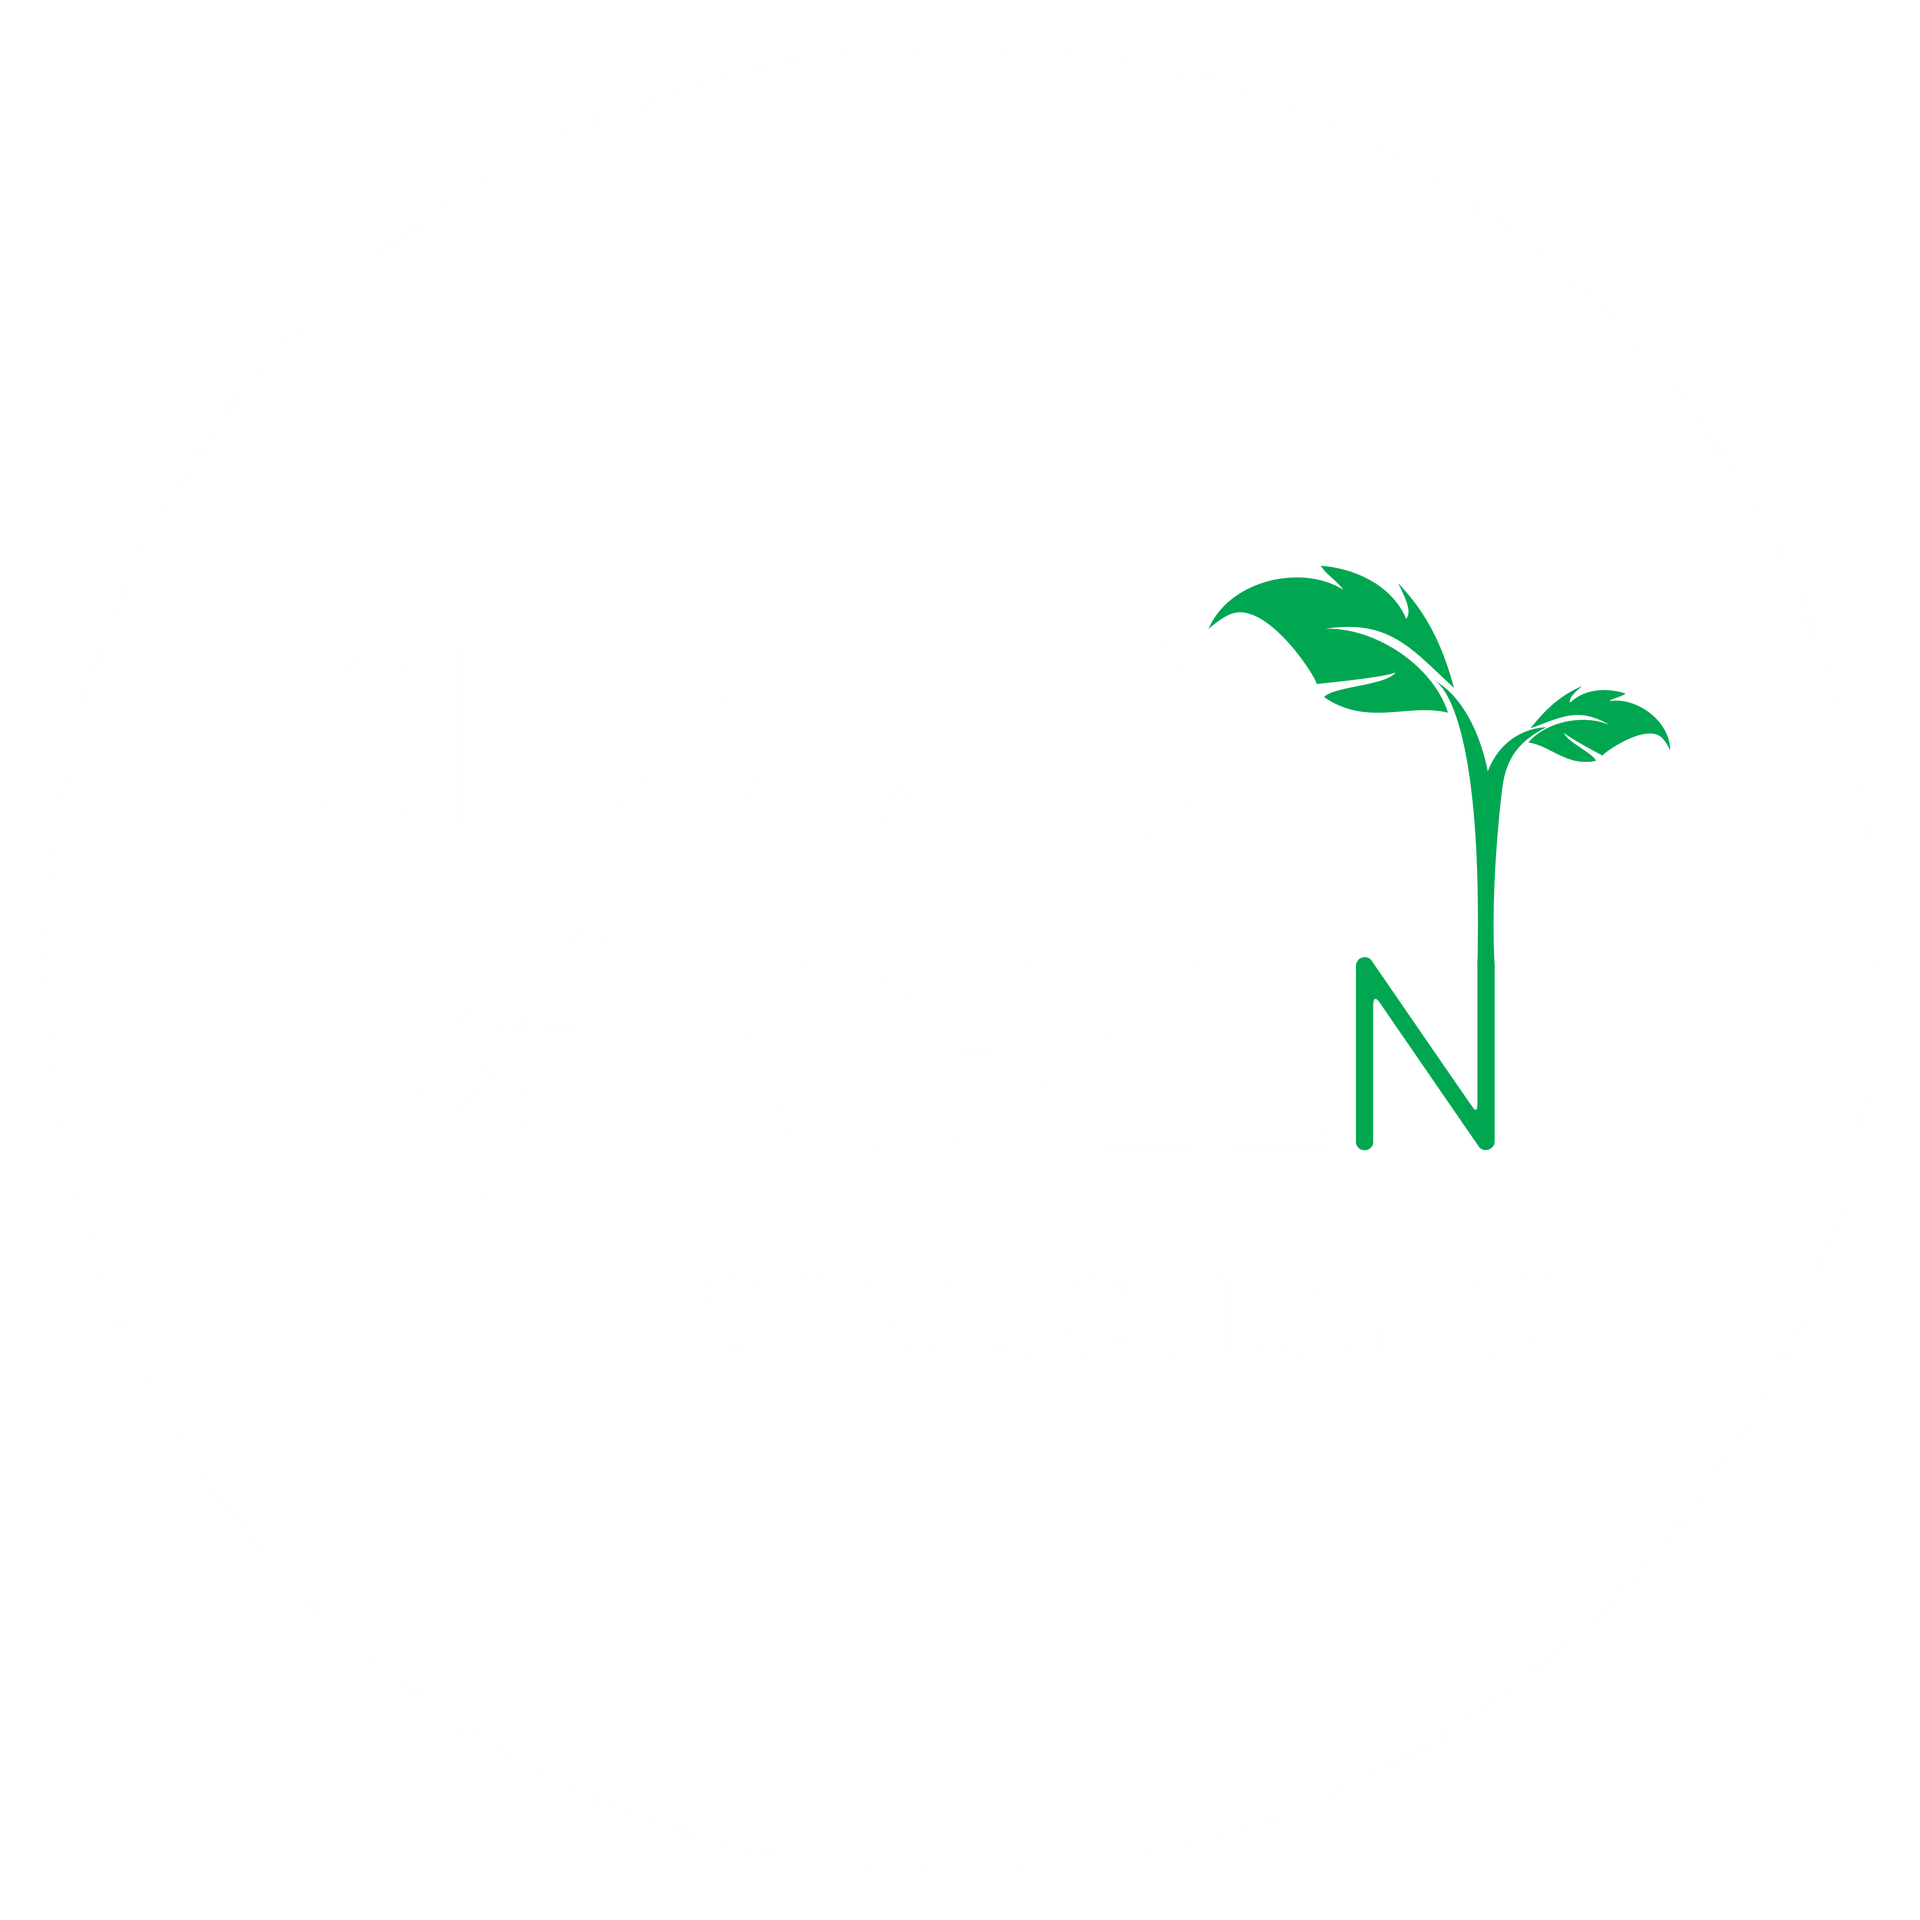 Shades of Green Landscaping Business Logo